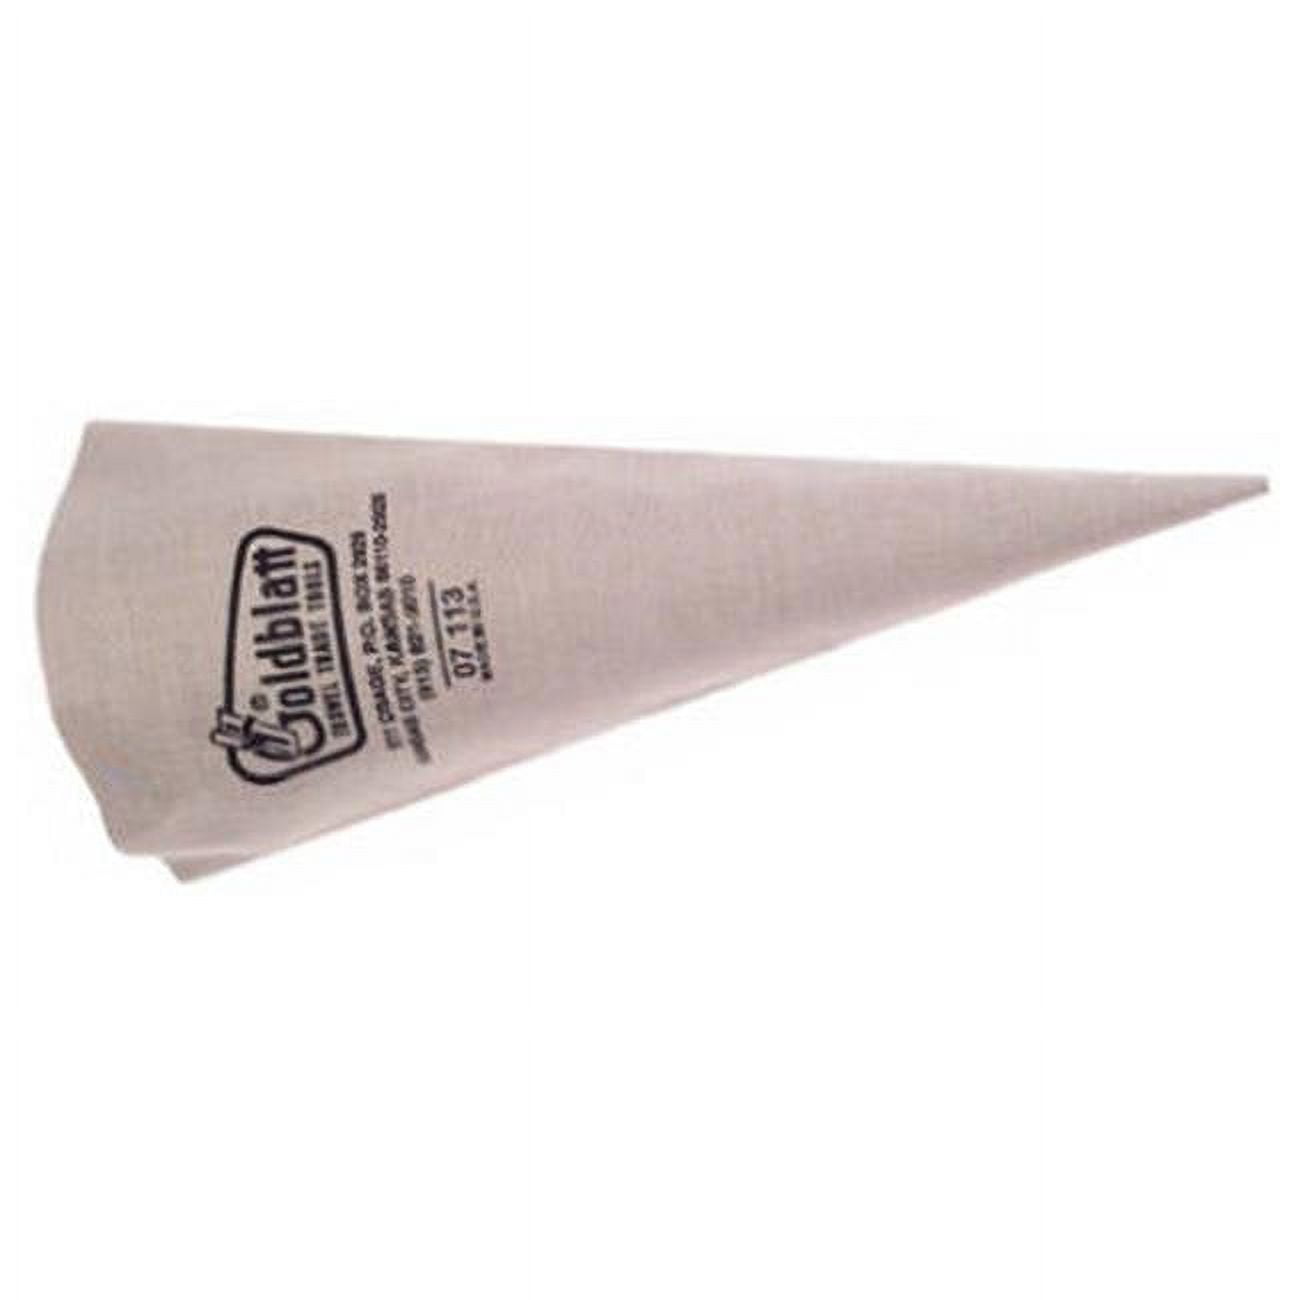 Grout Bag with reinforced Tip - EACH - Tile Outlets of America